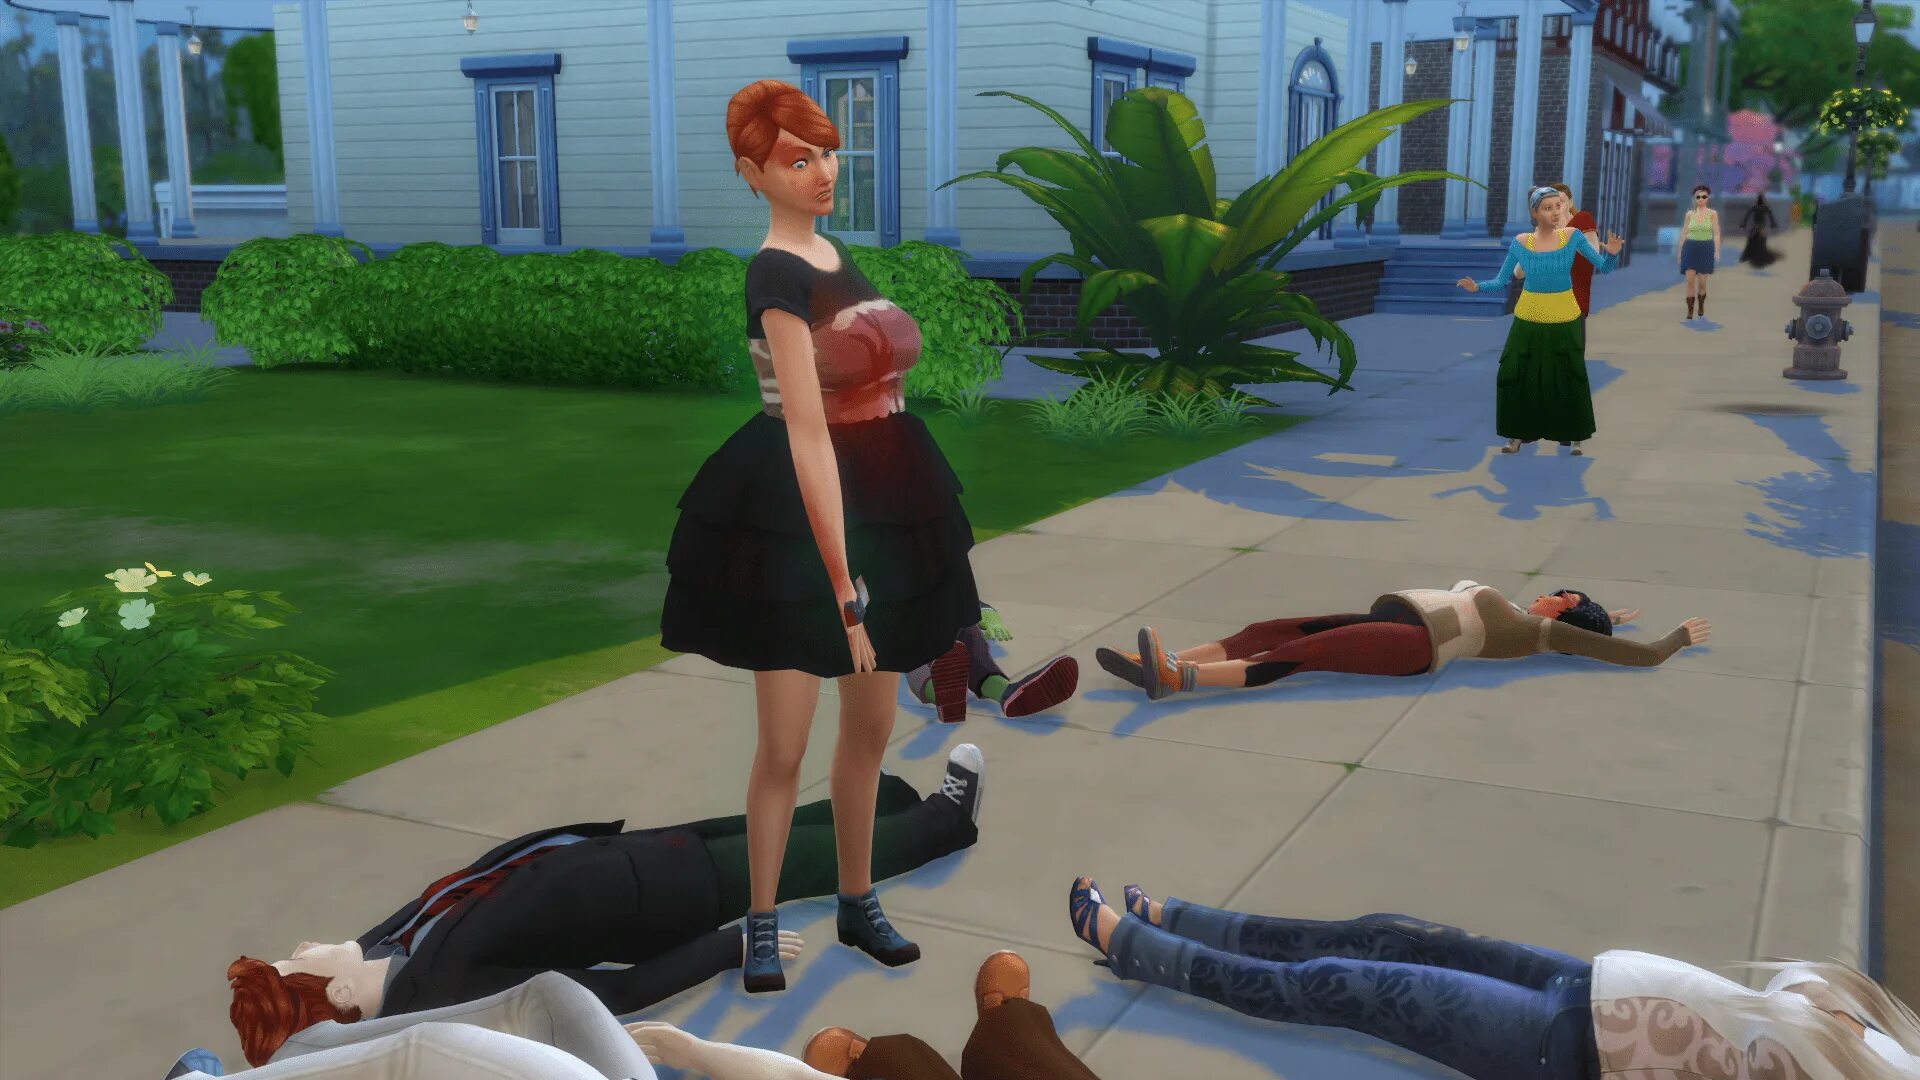 Wickedwhims на русском анимации. SIMS 4 Murder. The SIMS 5 мода. SIMS 4 violence мод.